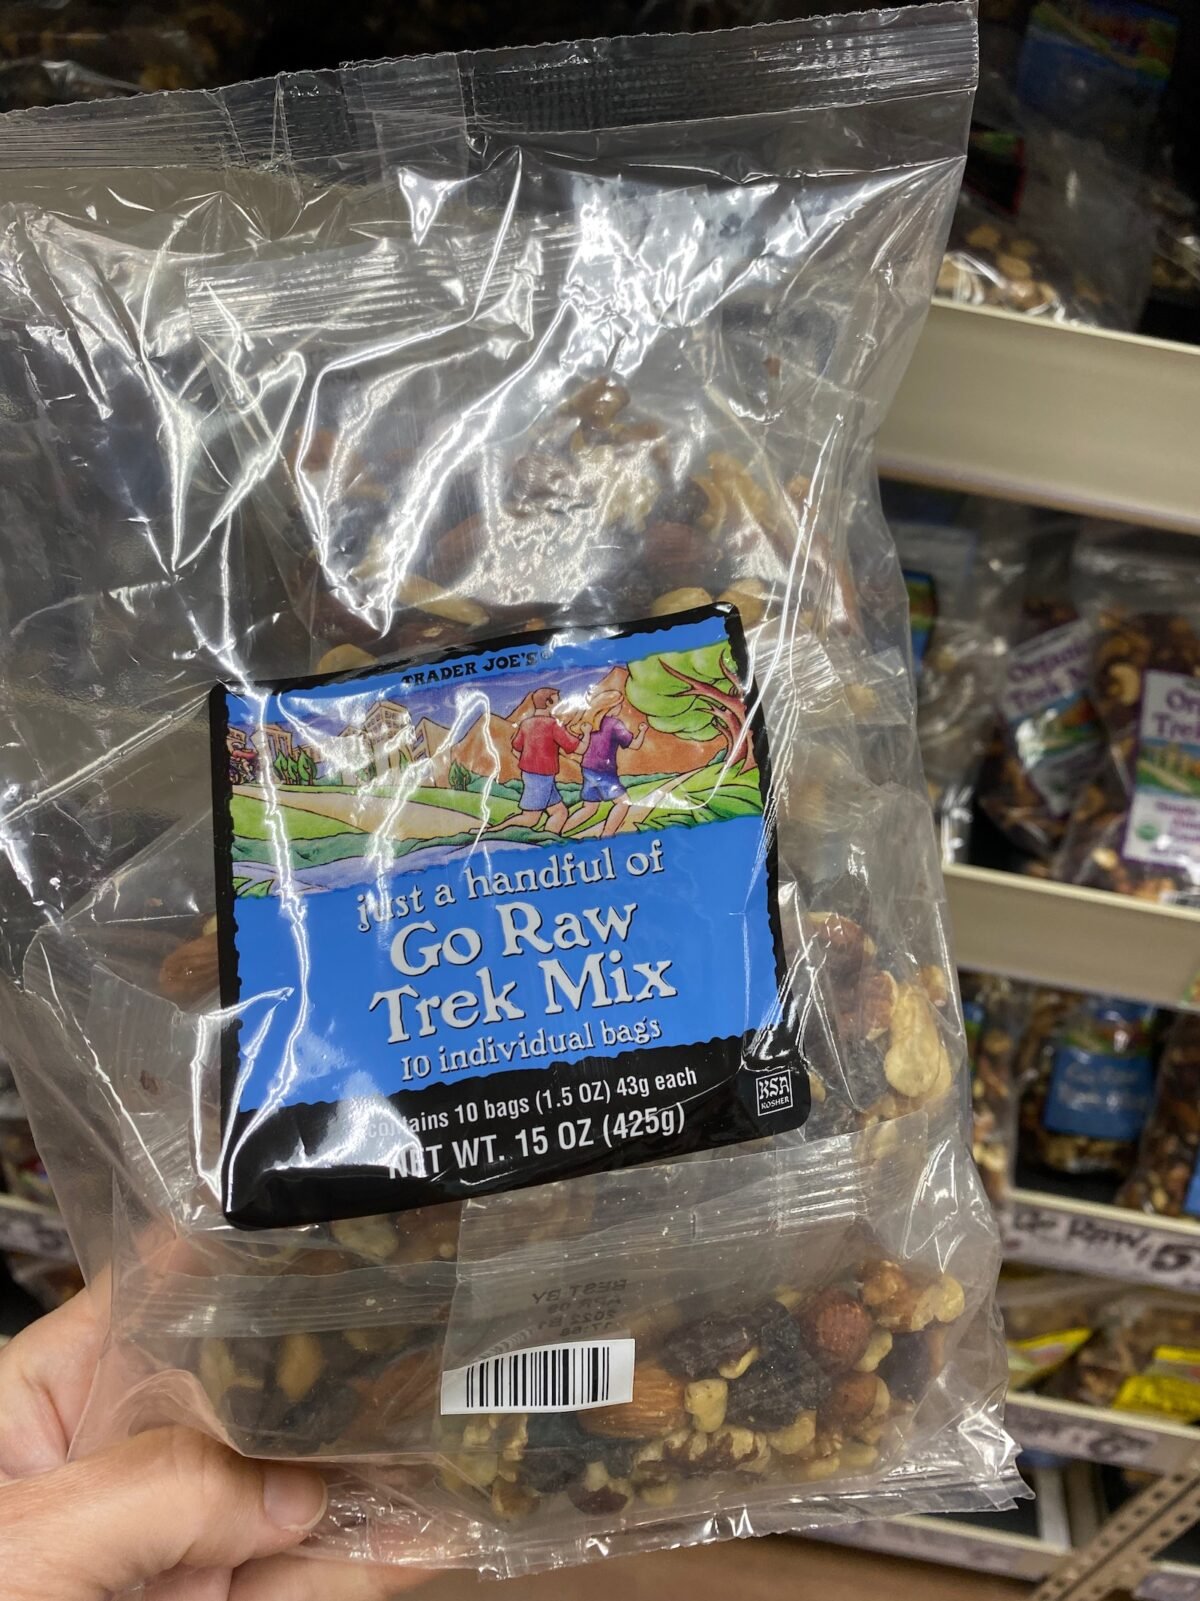 Bags of Go Raw Trek Mix healthy snack from Trader Joe's